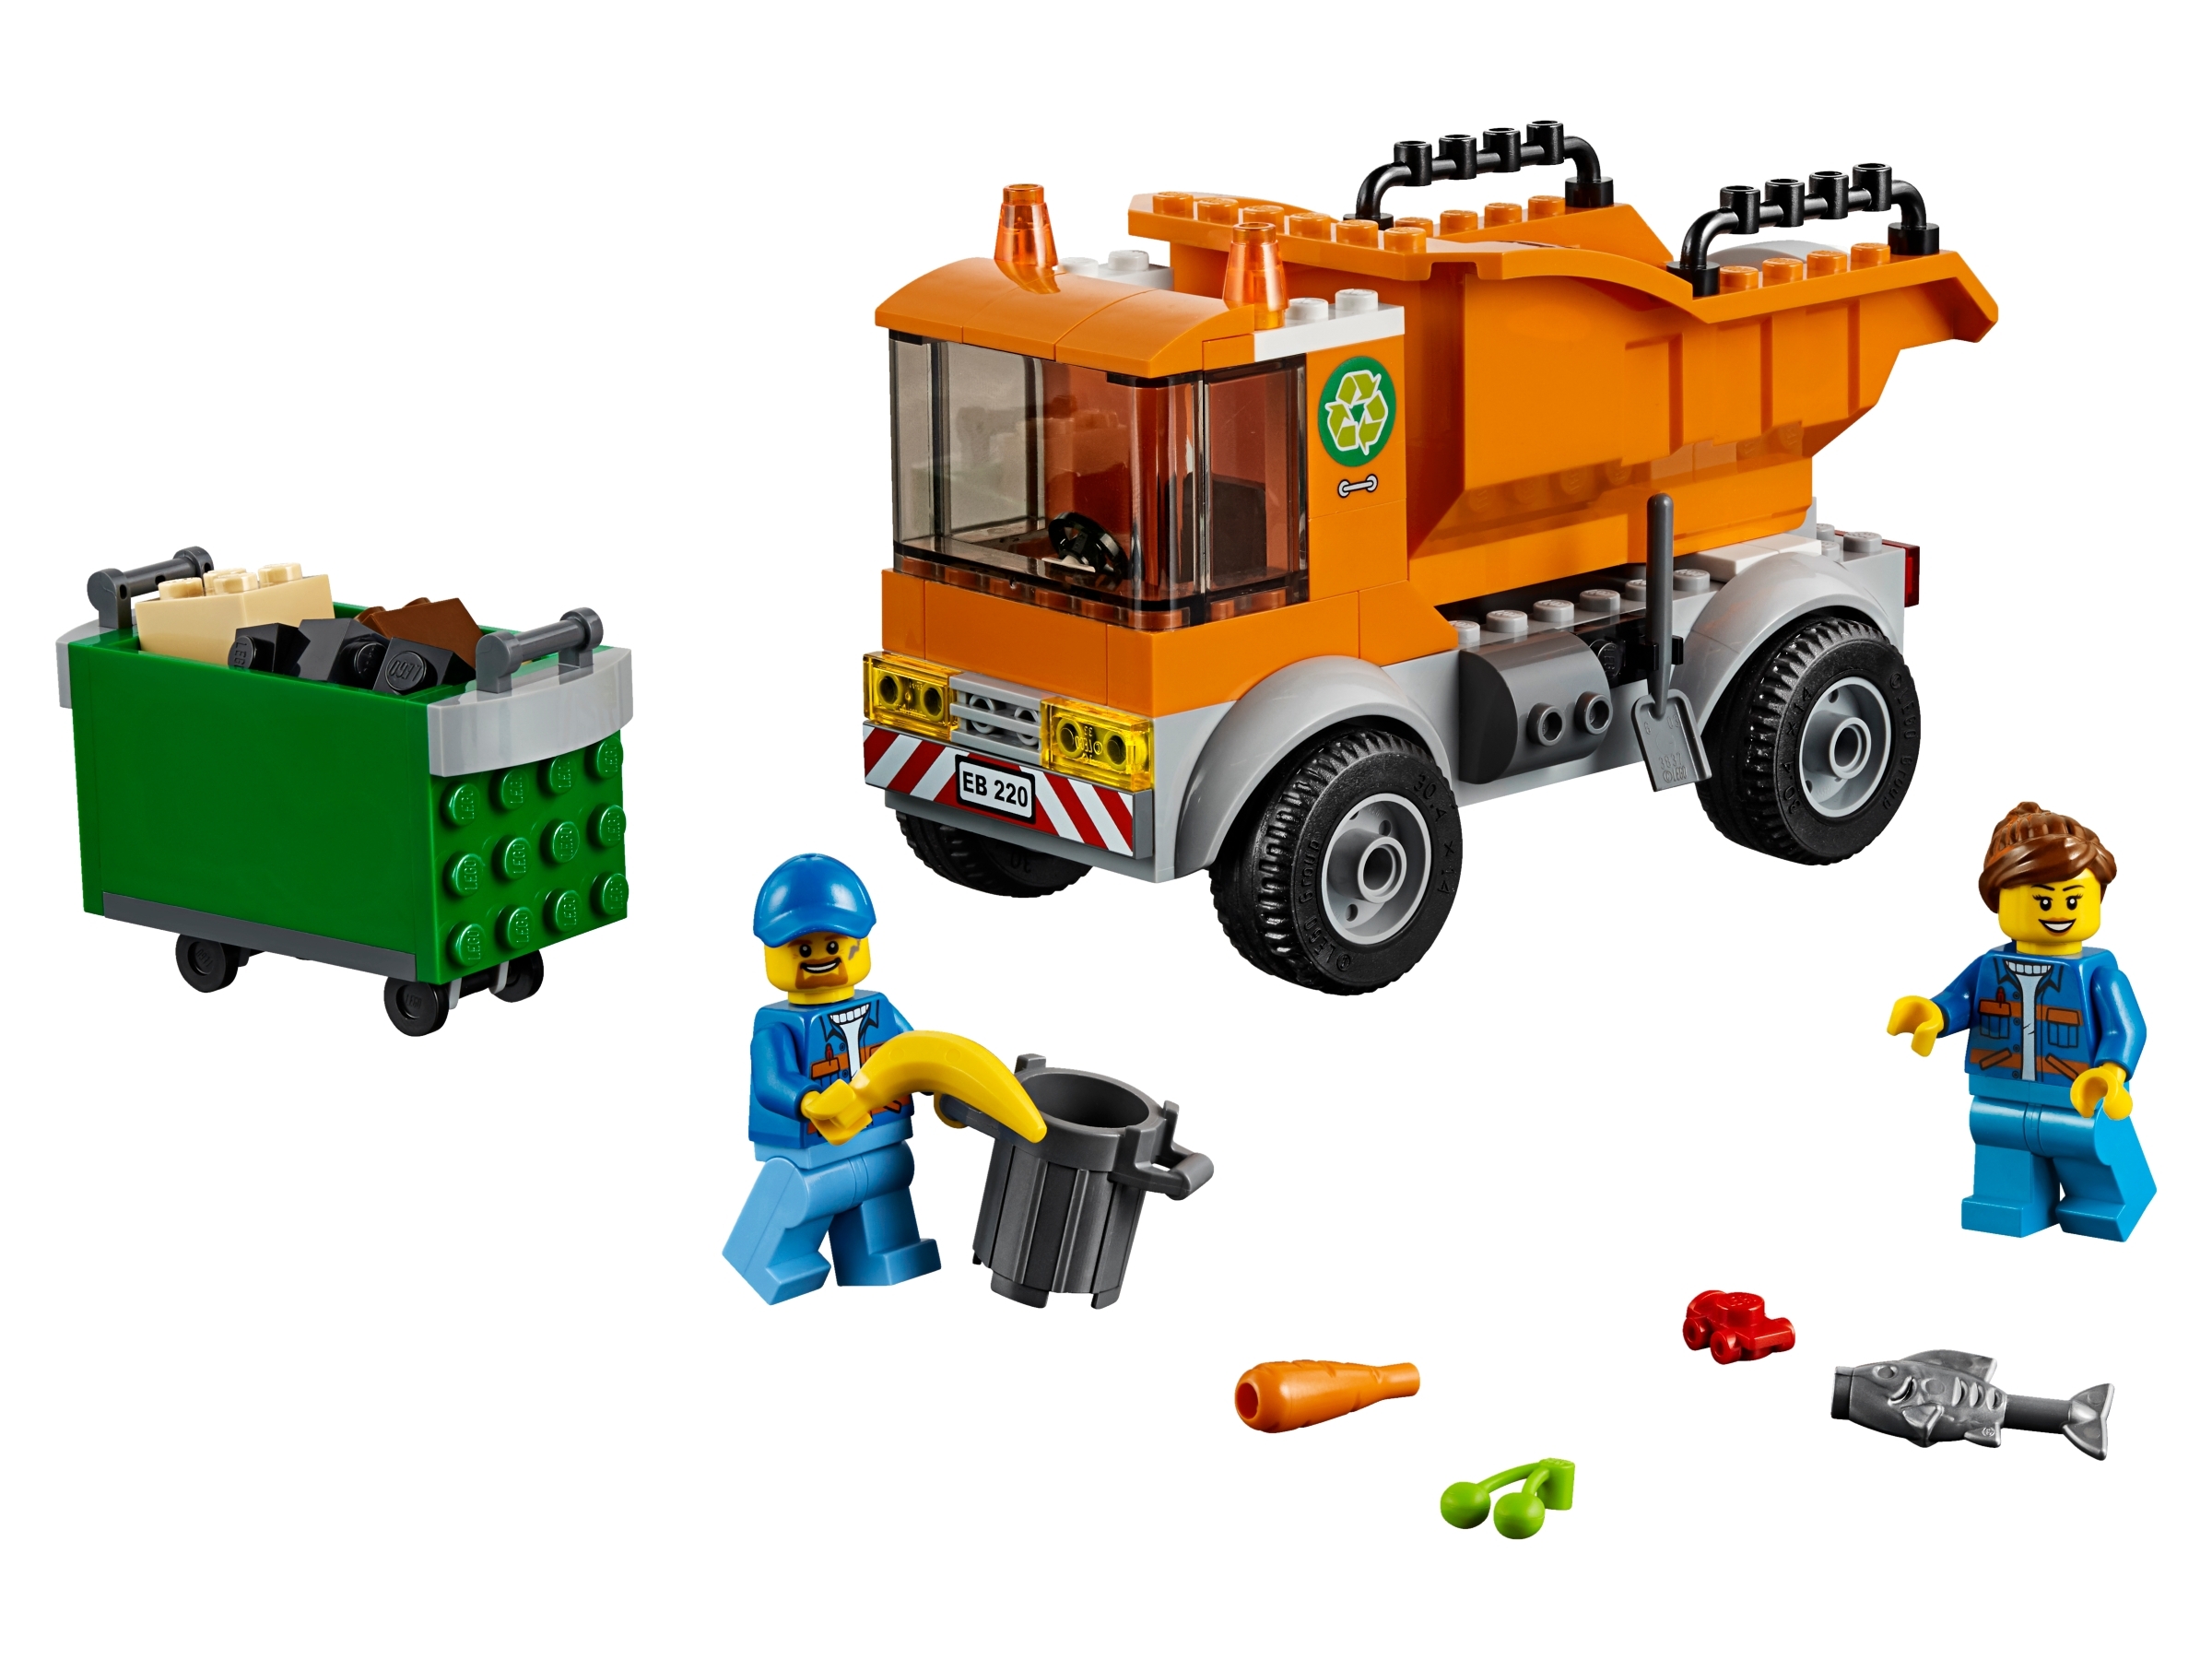 Garbage Truck 60220 | City | Buy online at the Official LEGO® Shop CA